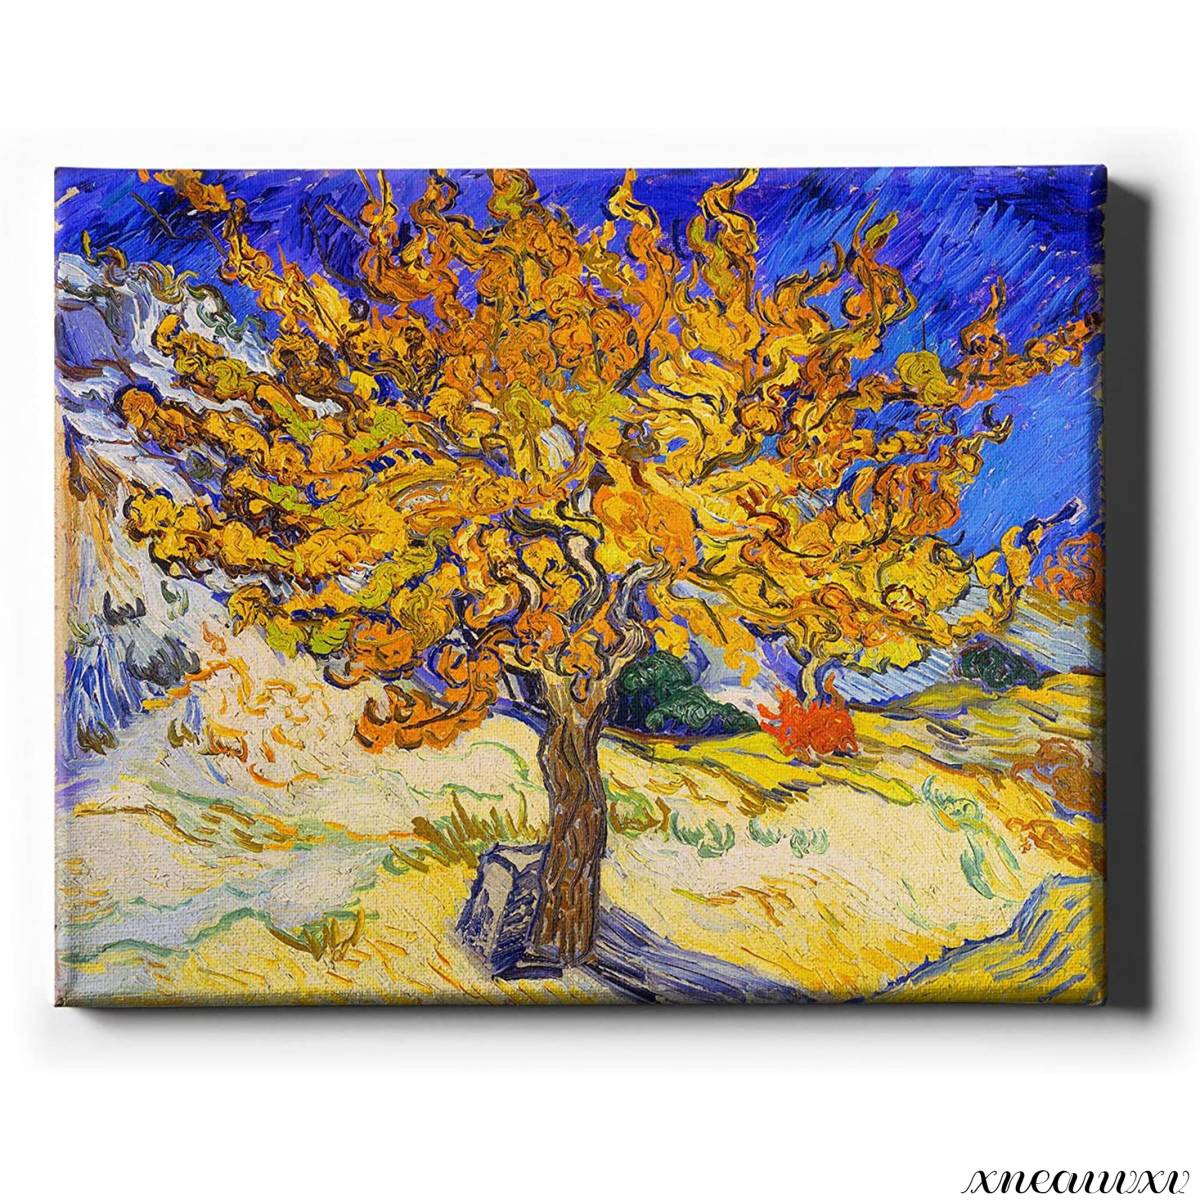 High-quality art panel, Mulberry tree, replica, Van Gogh oil painting, interior, landscape painting, wall hanging, room decoration, decorative painting, canvas, nature painting, feng shui, art board, Painting, Oil painting, Nature, Landscape painting